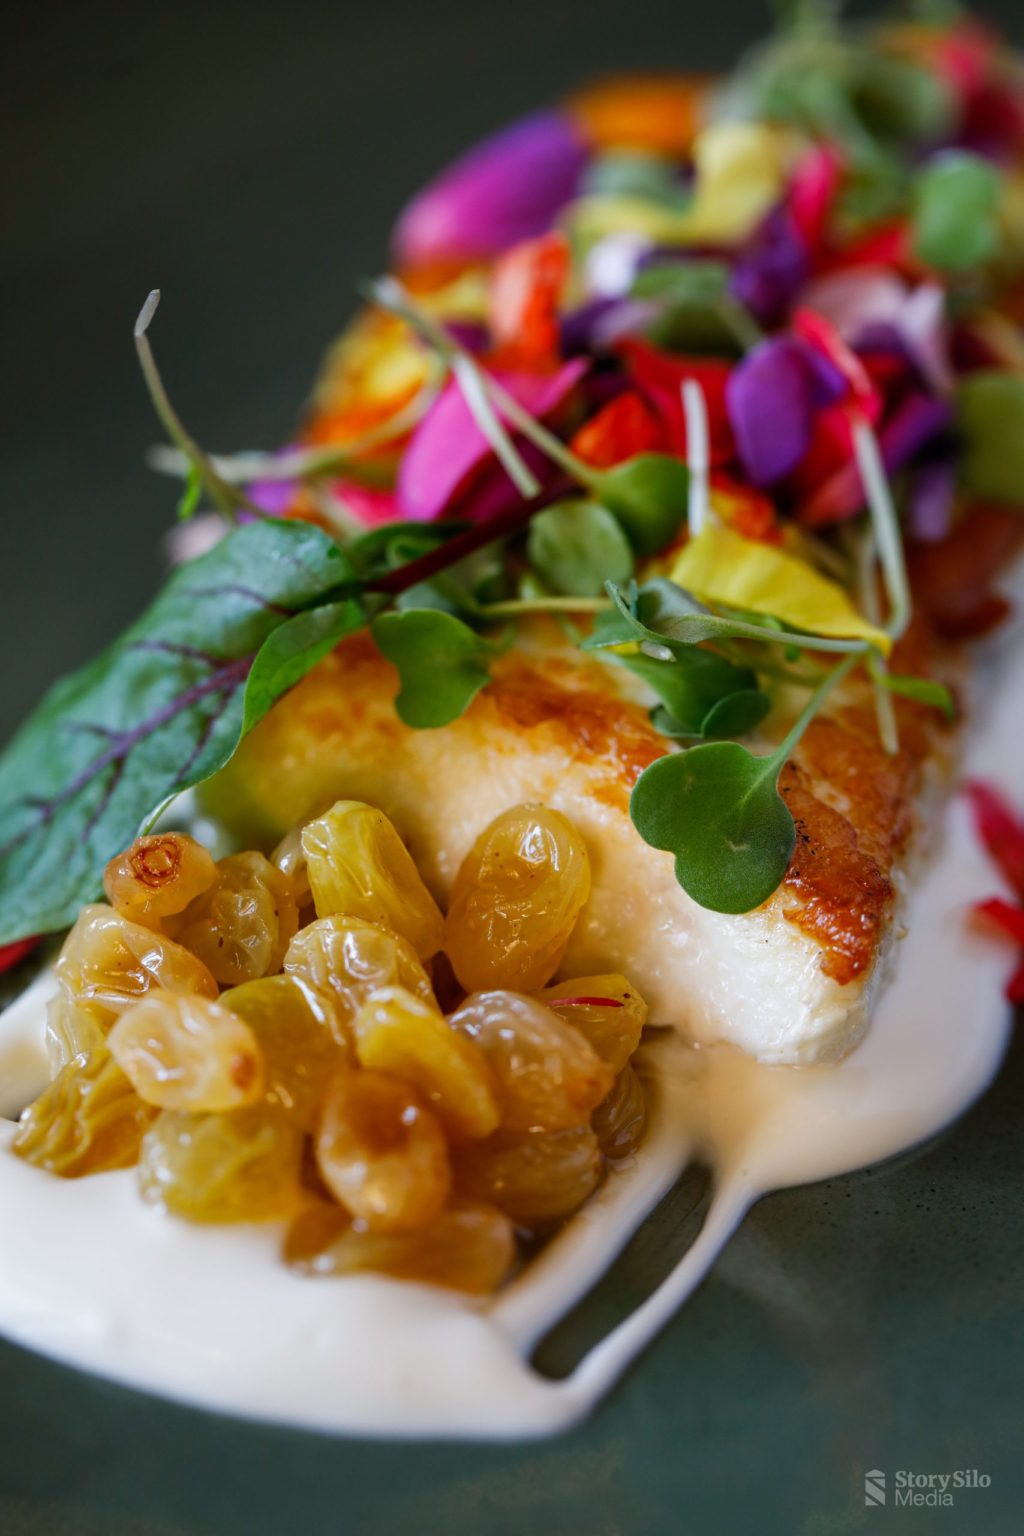 Image of beautifully plated fish with flowers, vegetables, and corn.